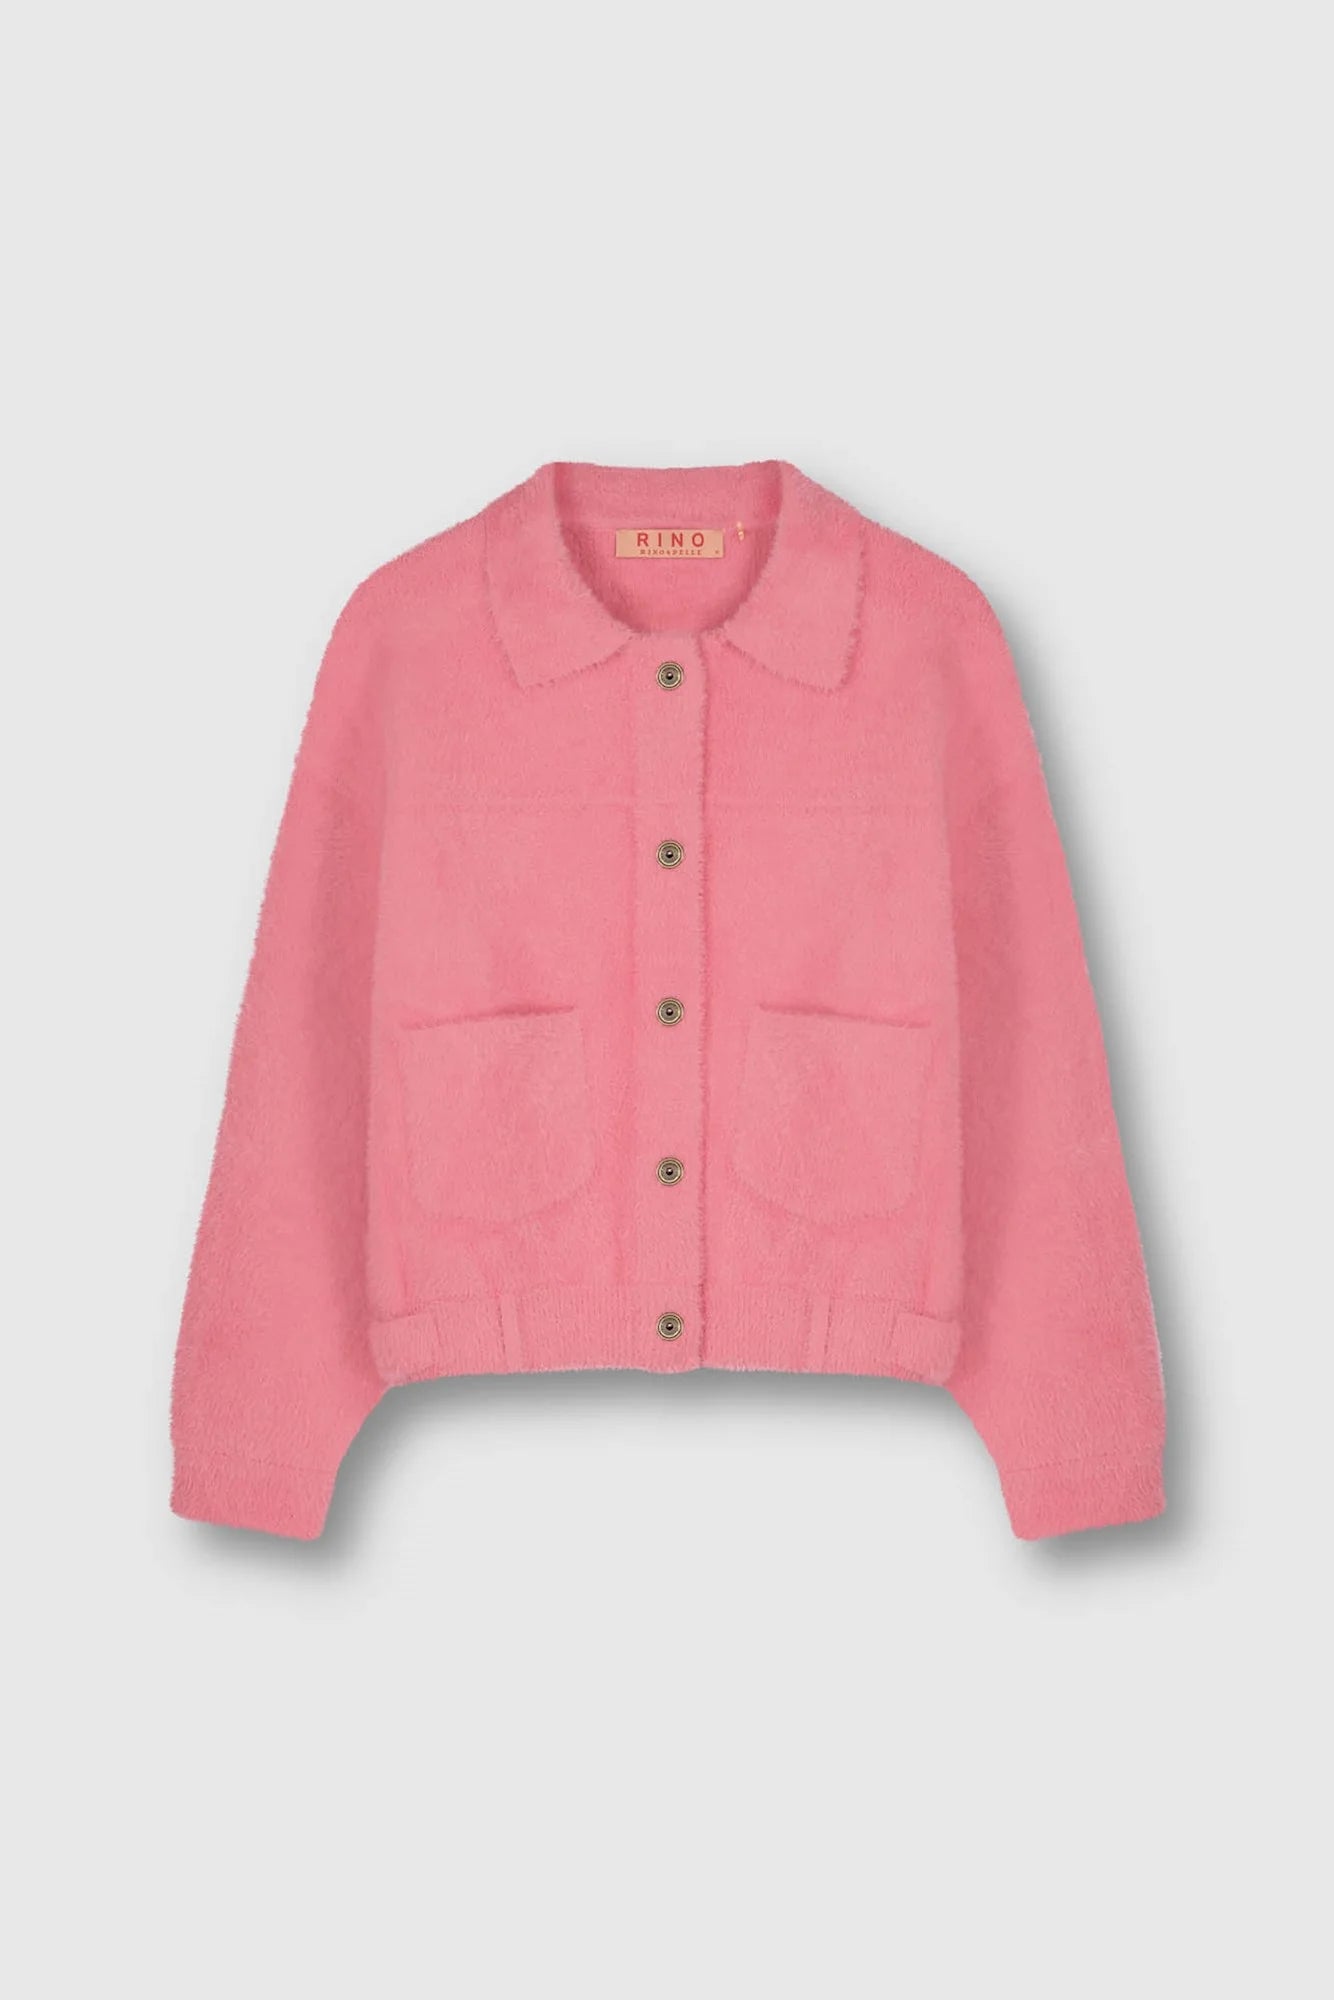 Boxy pink fluffy faux fur jacket with classic collar patch pockets and metallic button fastening